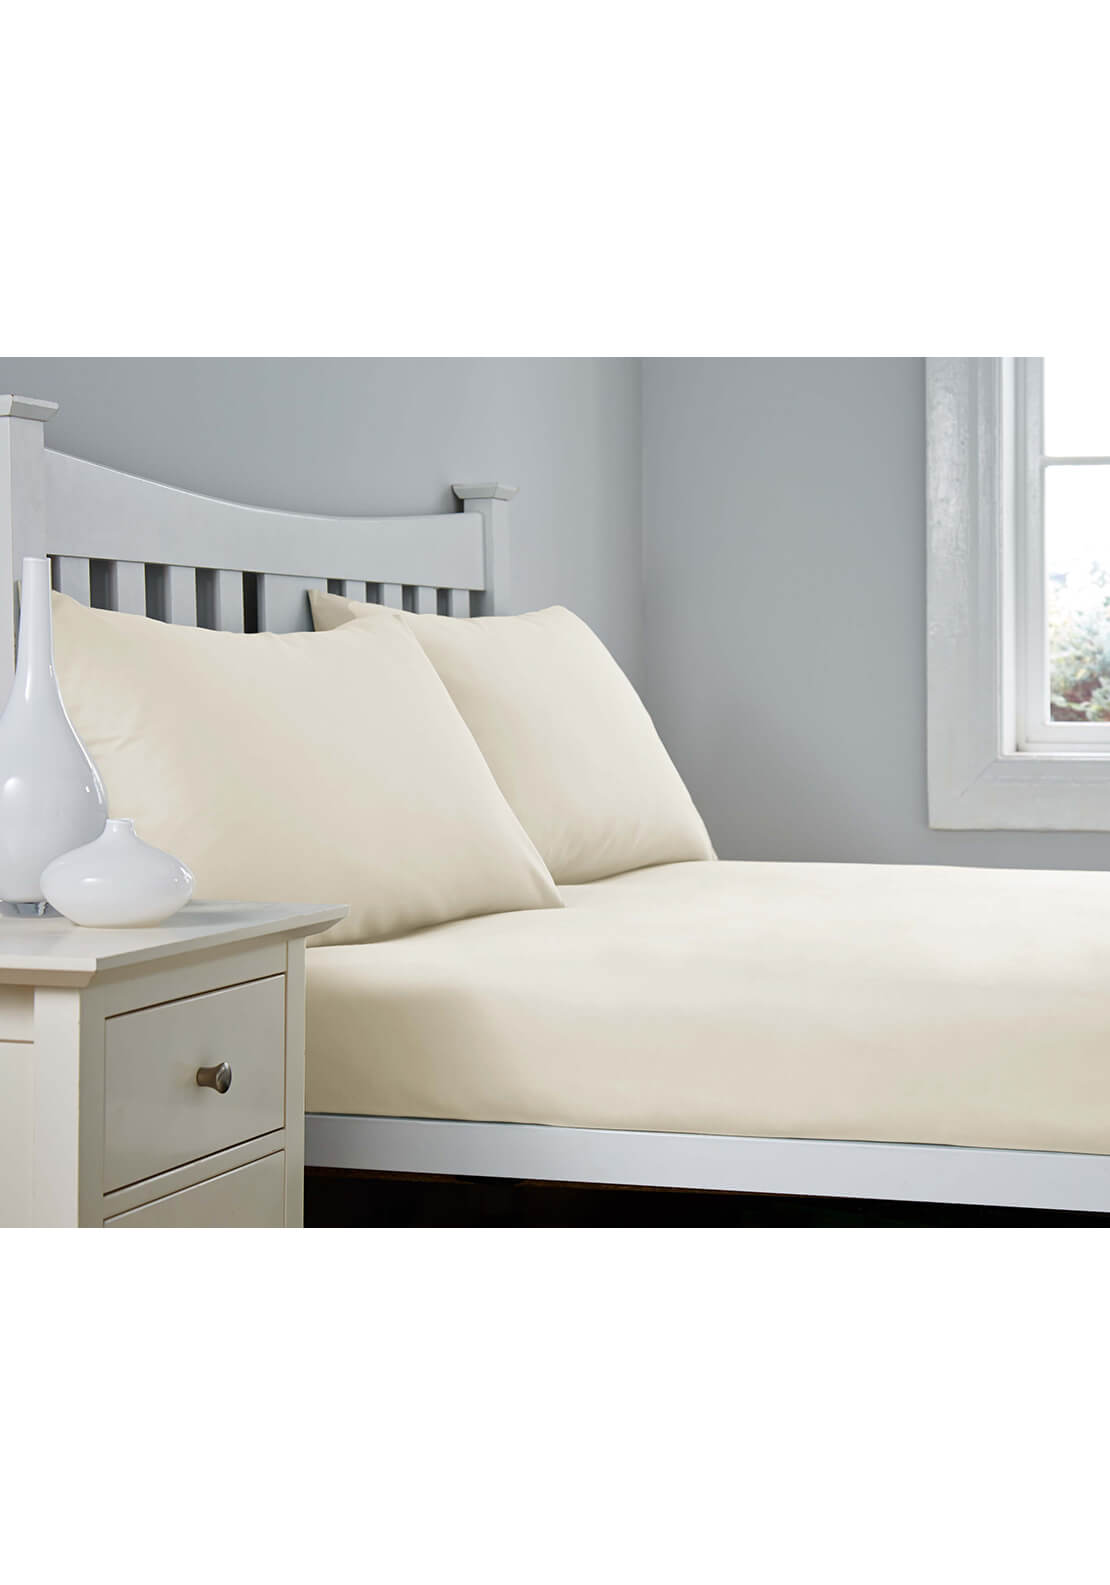 The Home Collection 300 Thread Count Fitted Sheet - Cream 1 Shaws Department Stores